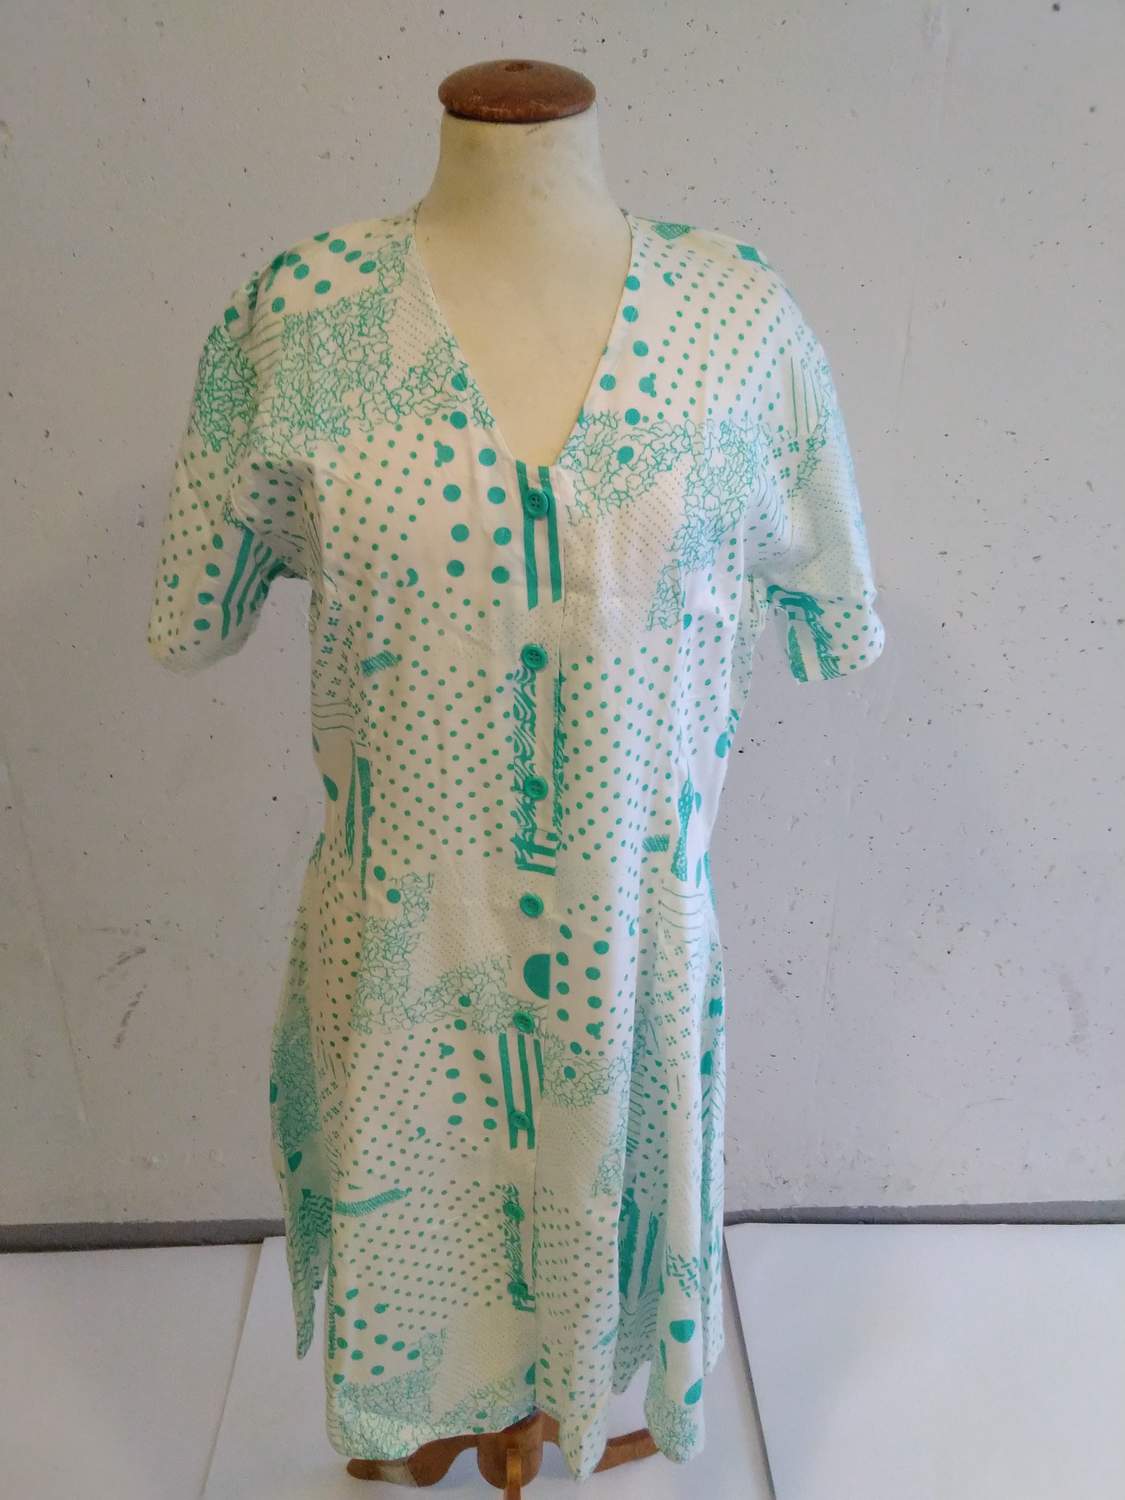 INDIAN BEAUTIFUL 100 % COTTON DRESS FOR LADIES WITH V-NECK STYLE-GREEN COLOR-CHEAPEST PRICE GUARANTEED-TRY ONCE- DO NOT MISS THIS CHANCE-50 % DISCOUNT.ART NO.17/36399087